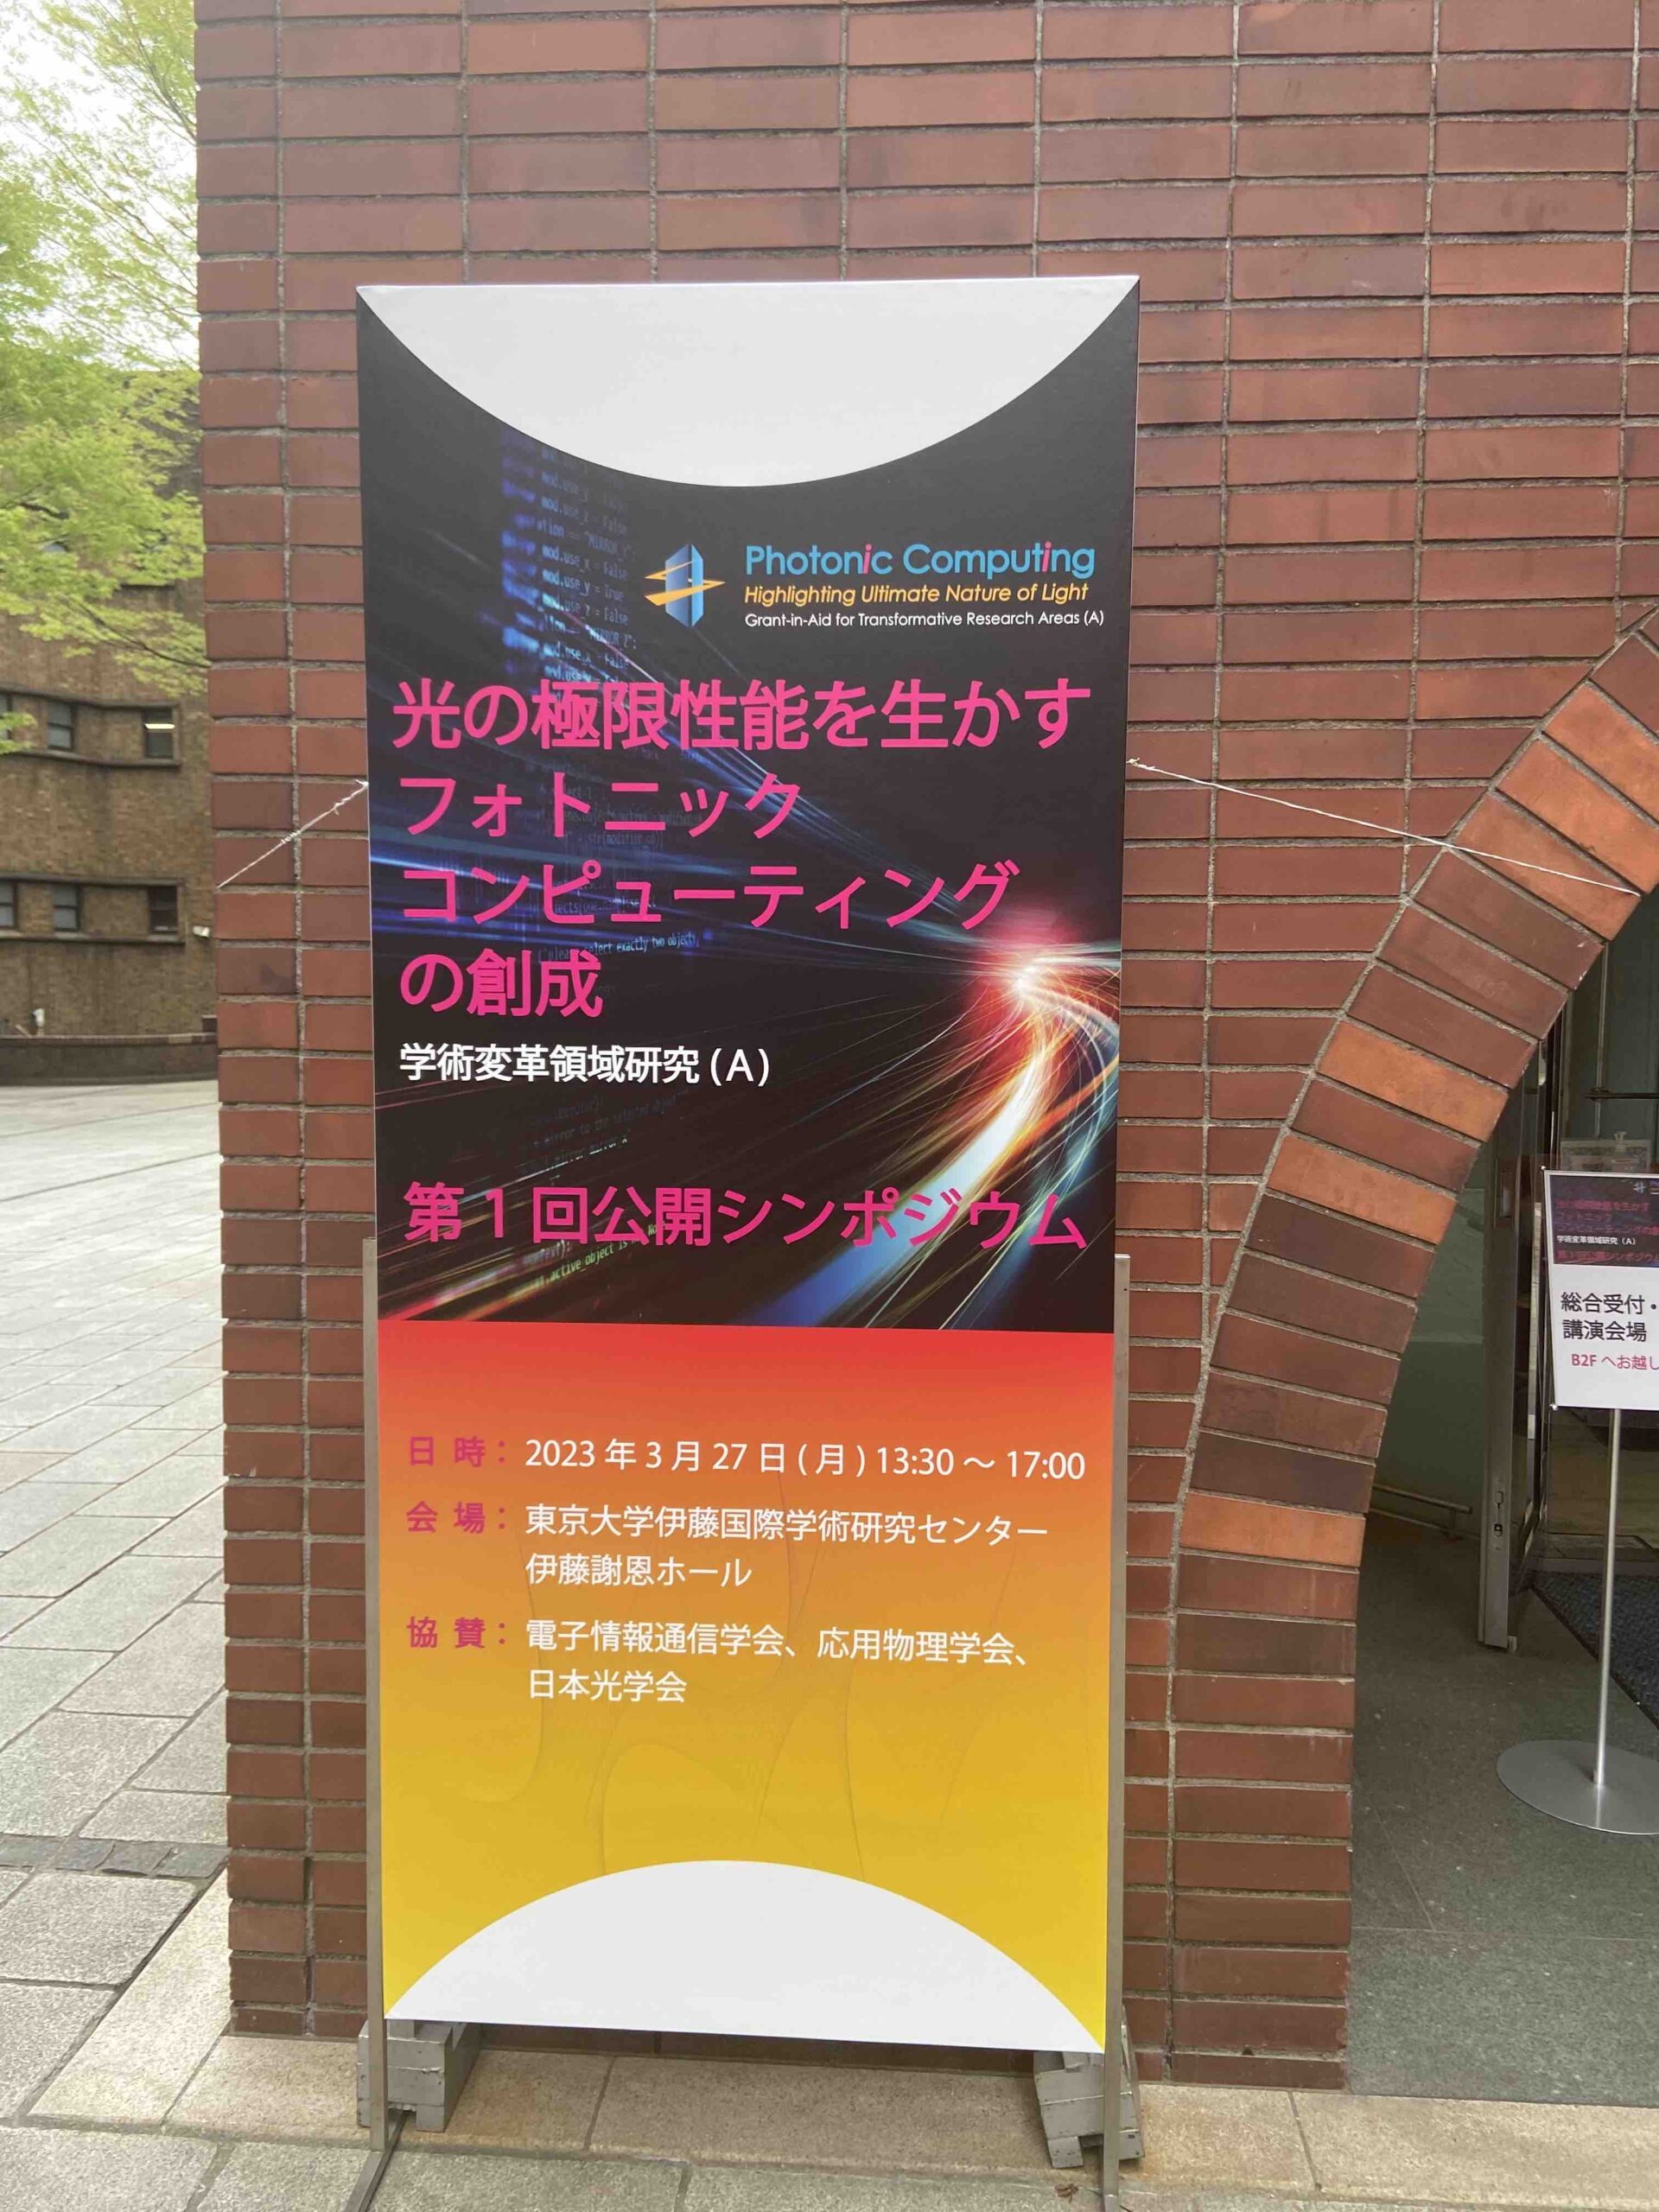 Satoshi gave a talk on optical computing at a symposium supported by a photonic computing project.